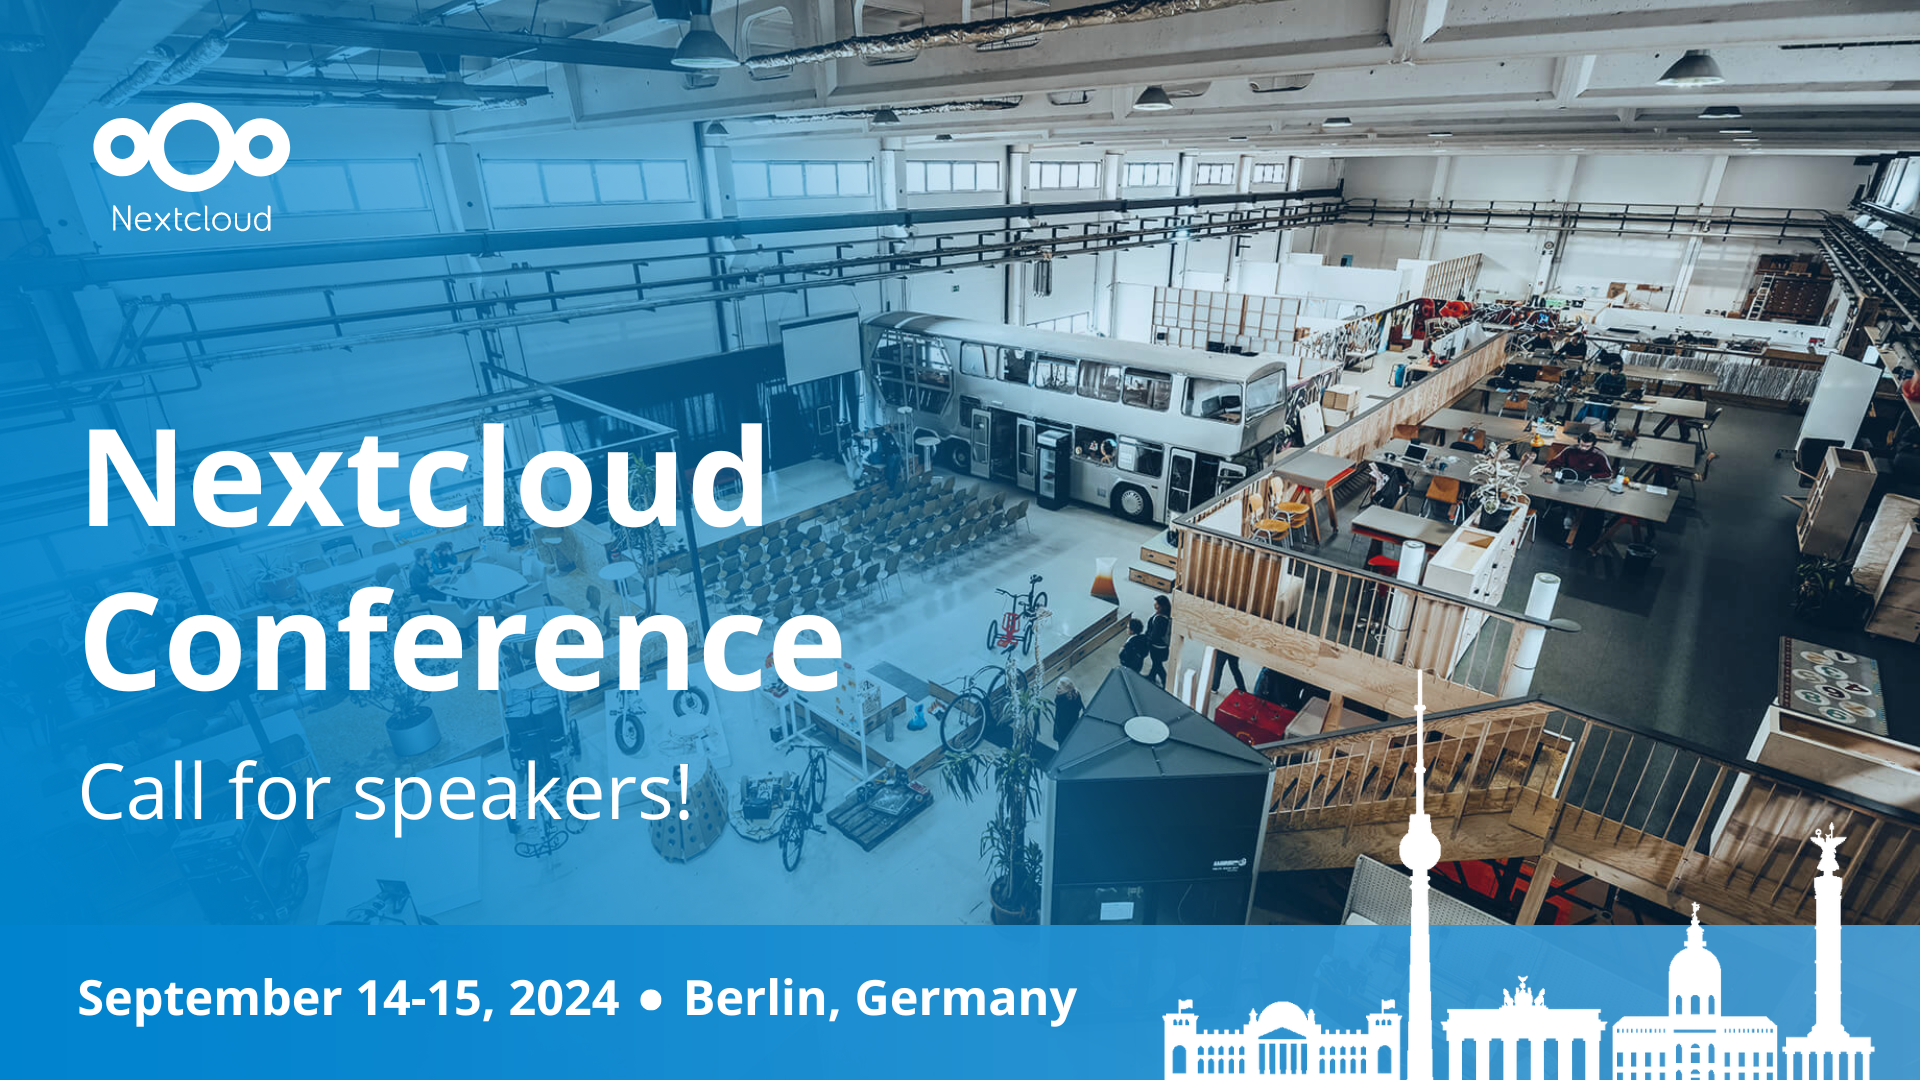 Nextcloud Conference 2024 call for speakers